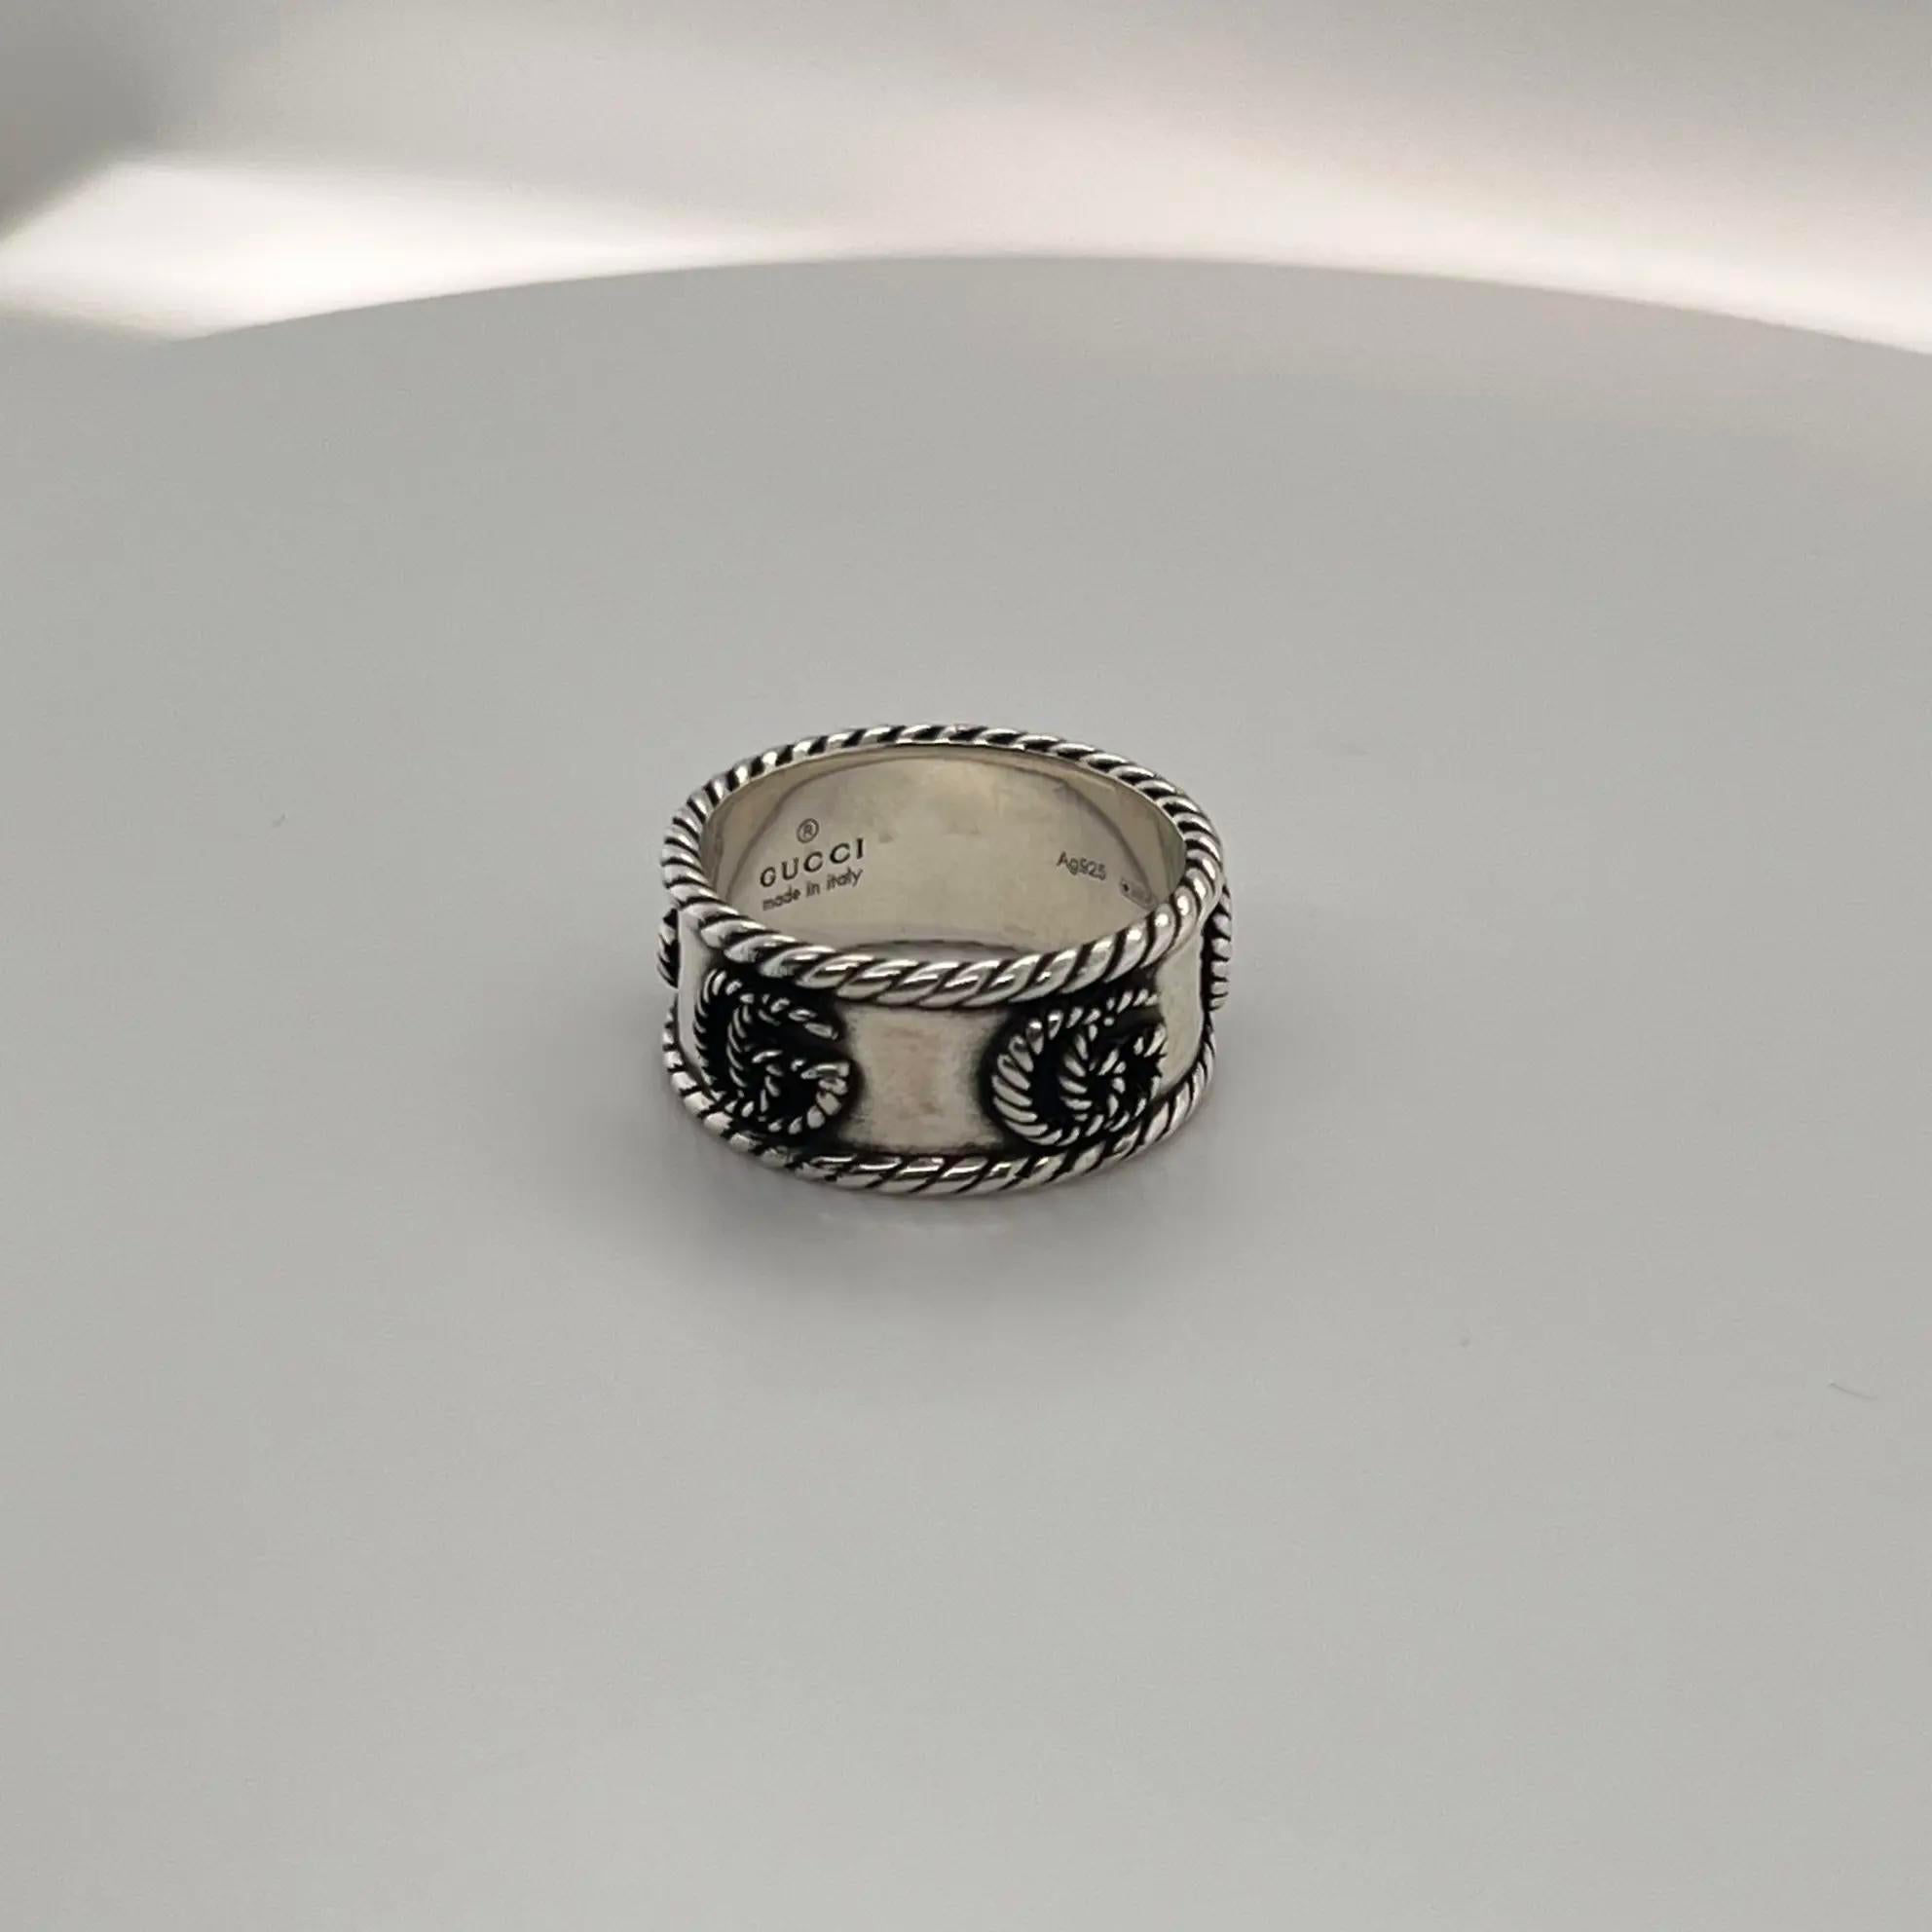 size g ring in us